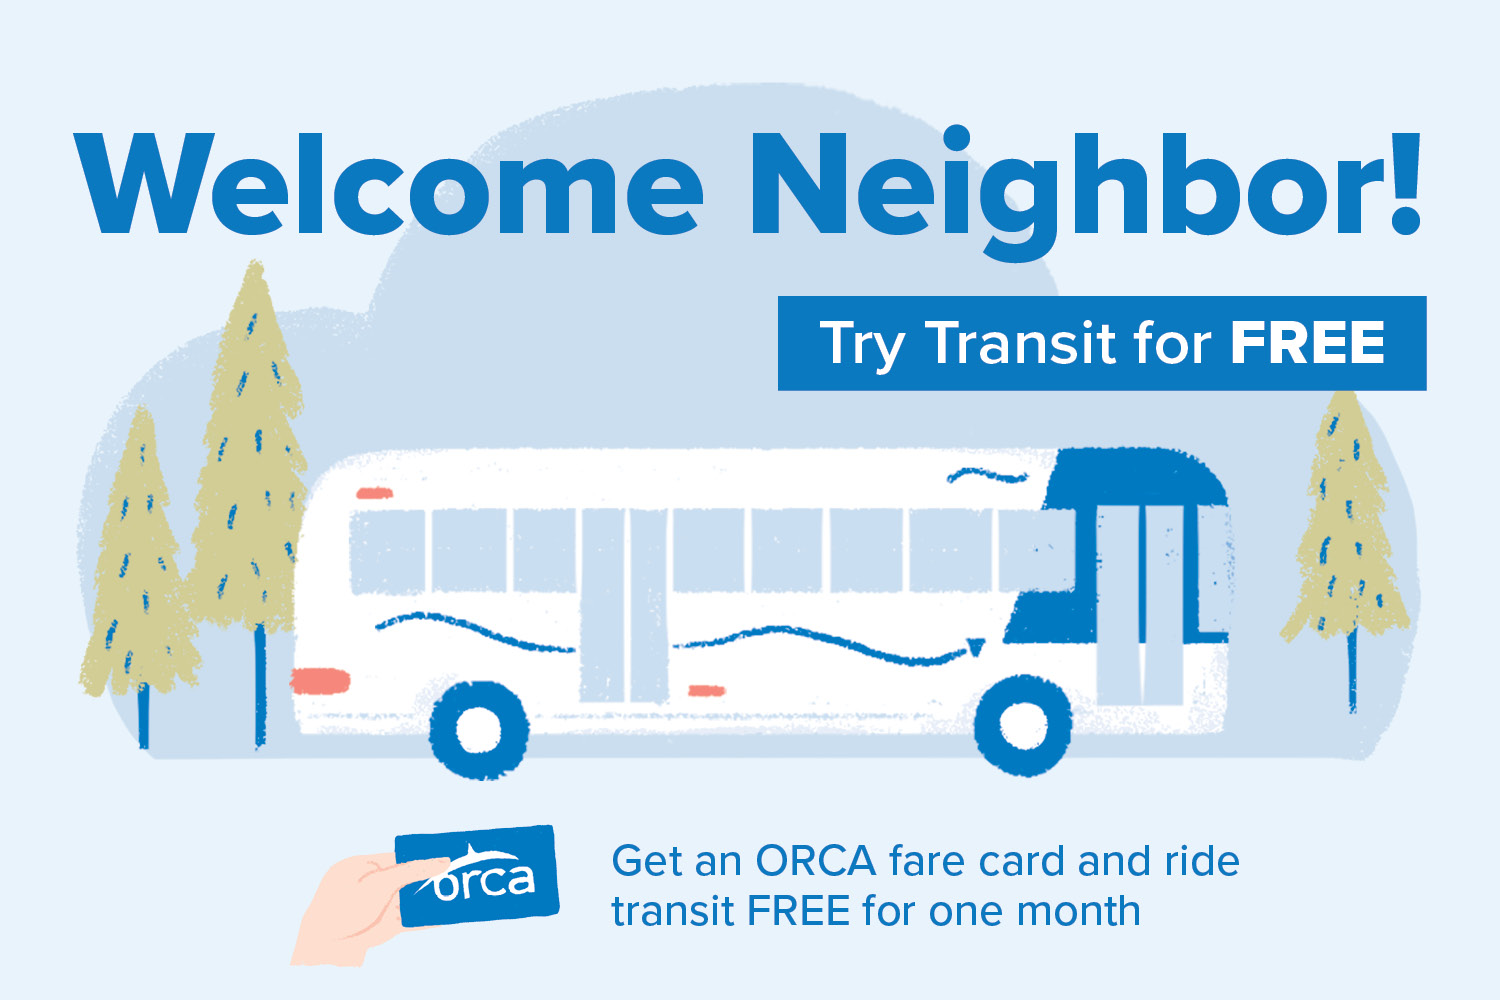 Welcome Neighbor! Try transit free! Get and ORCA card and ride transit free for one month.